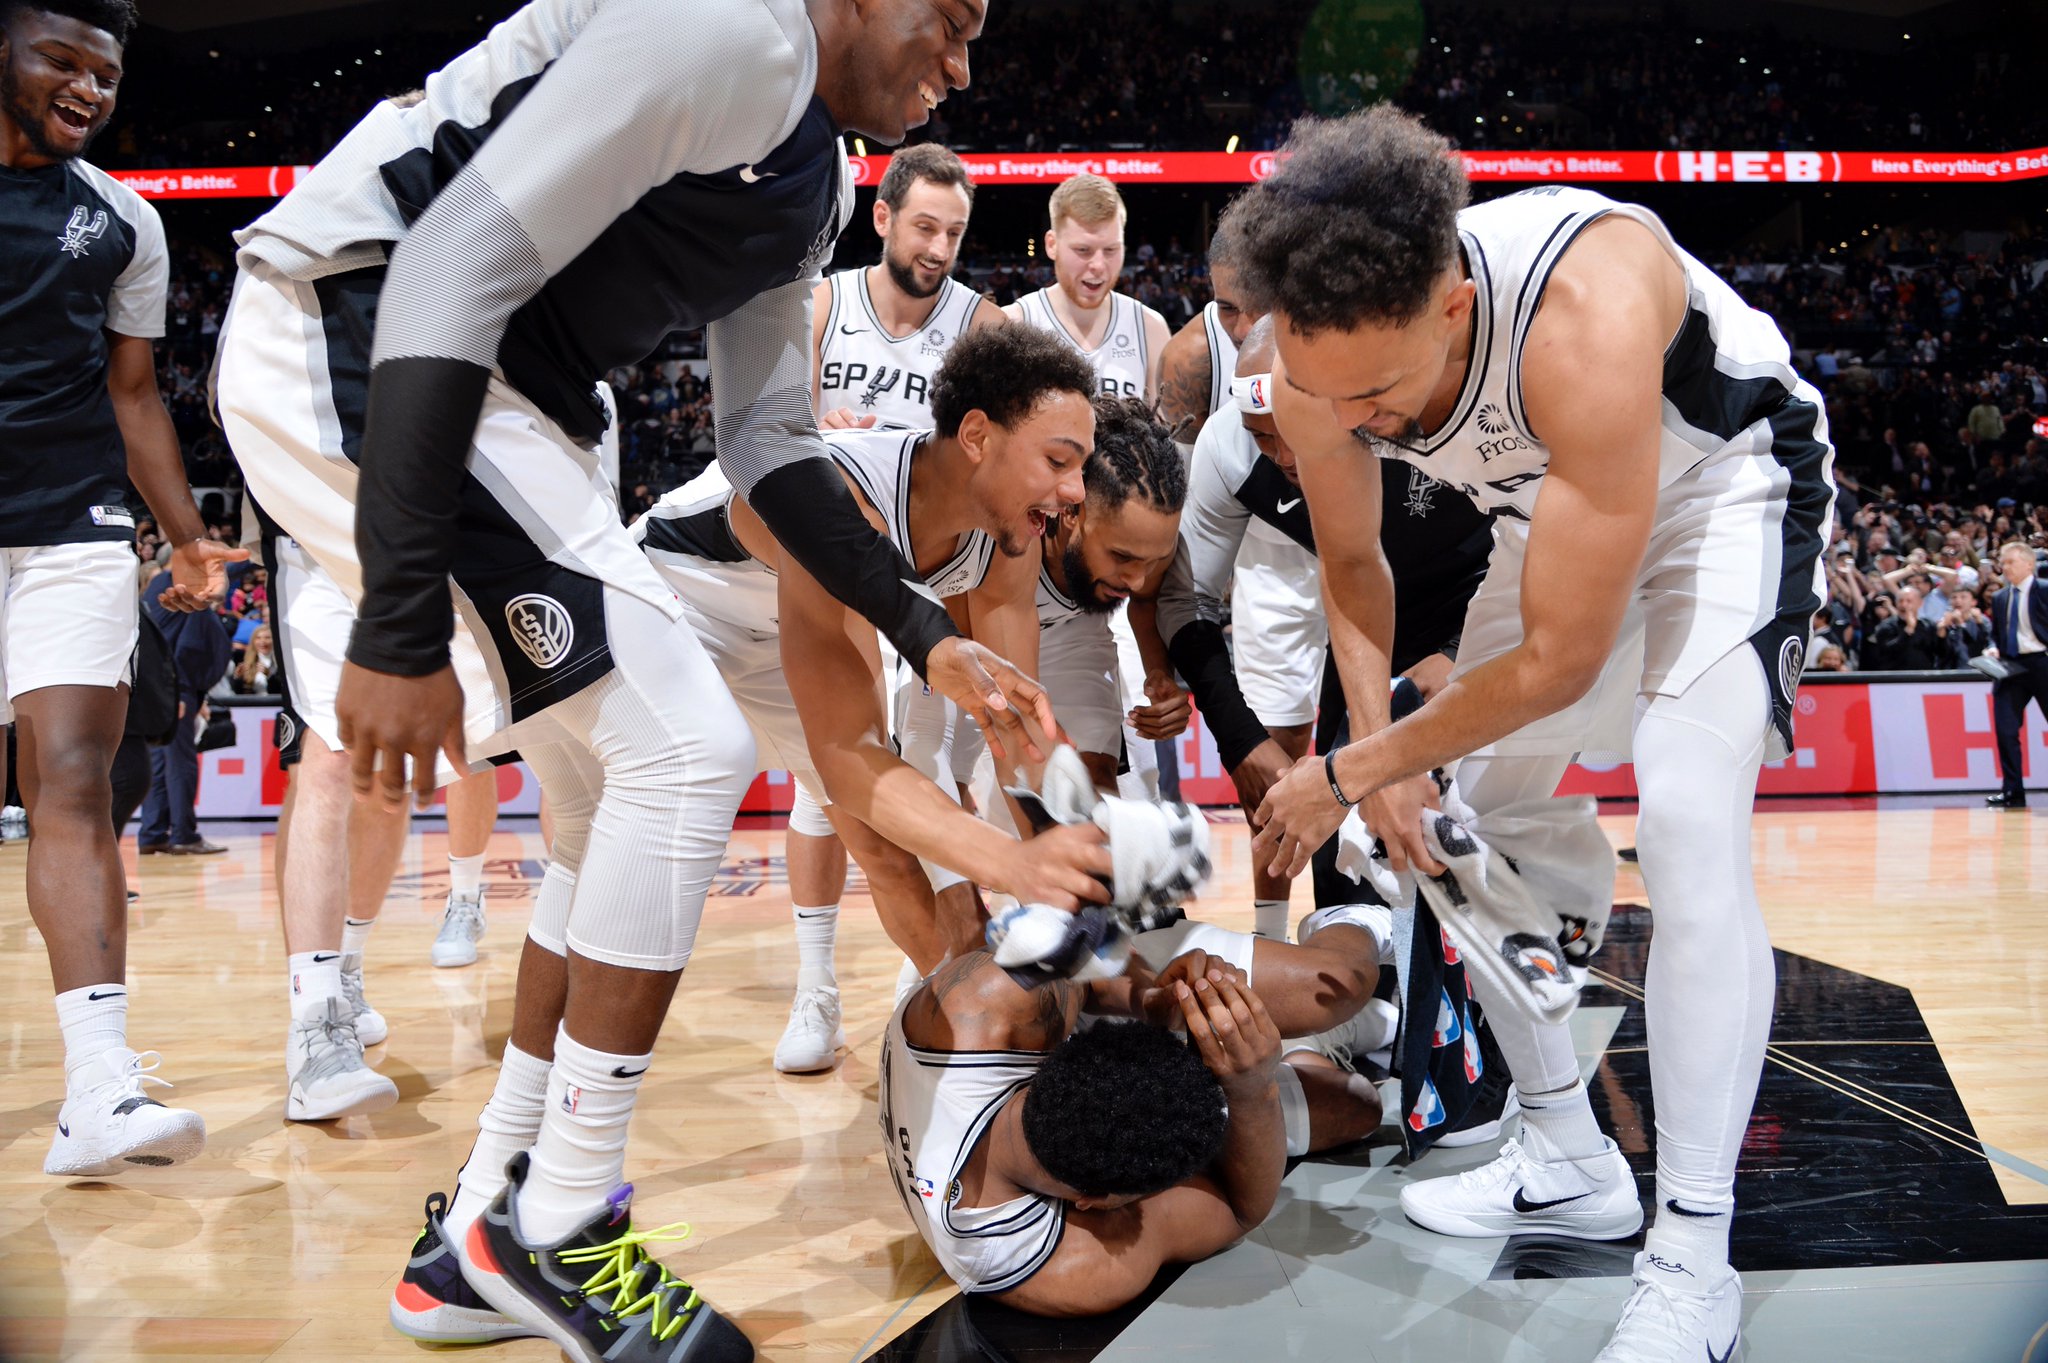 Rudy Gay on Twitter: "Miss these moments with my guys 🙏🏾… "